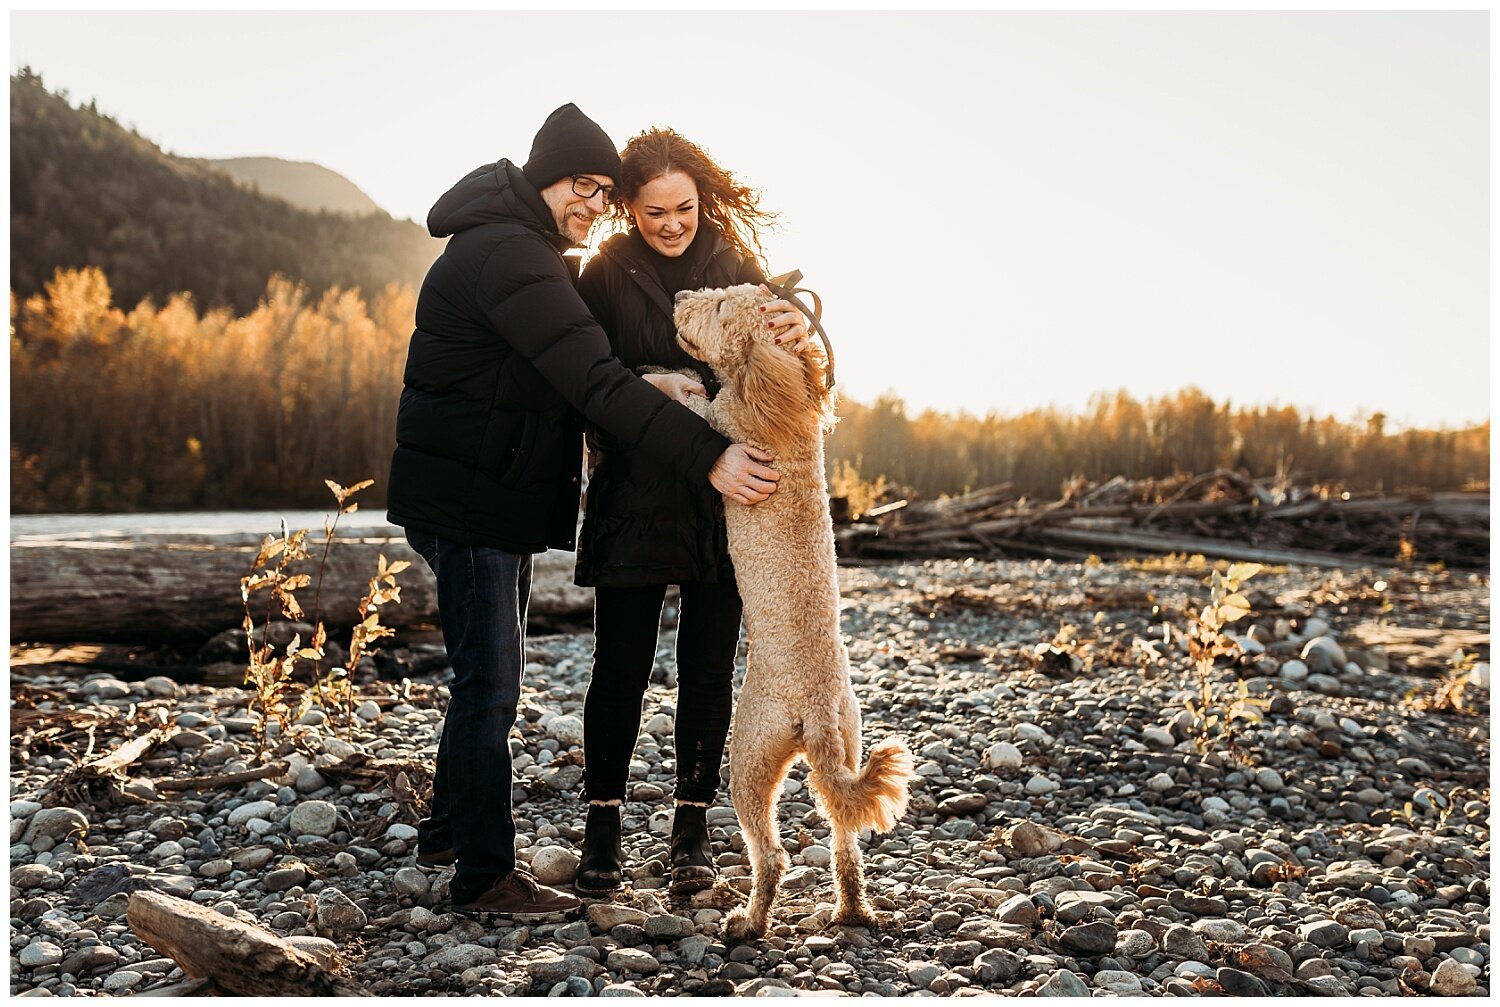 Vedder+River+Couples+-+Anna+Hurley+Photography+-+Chilliwack,+BC+15.jpg